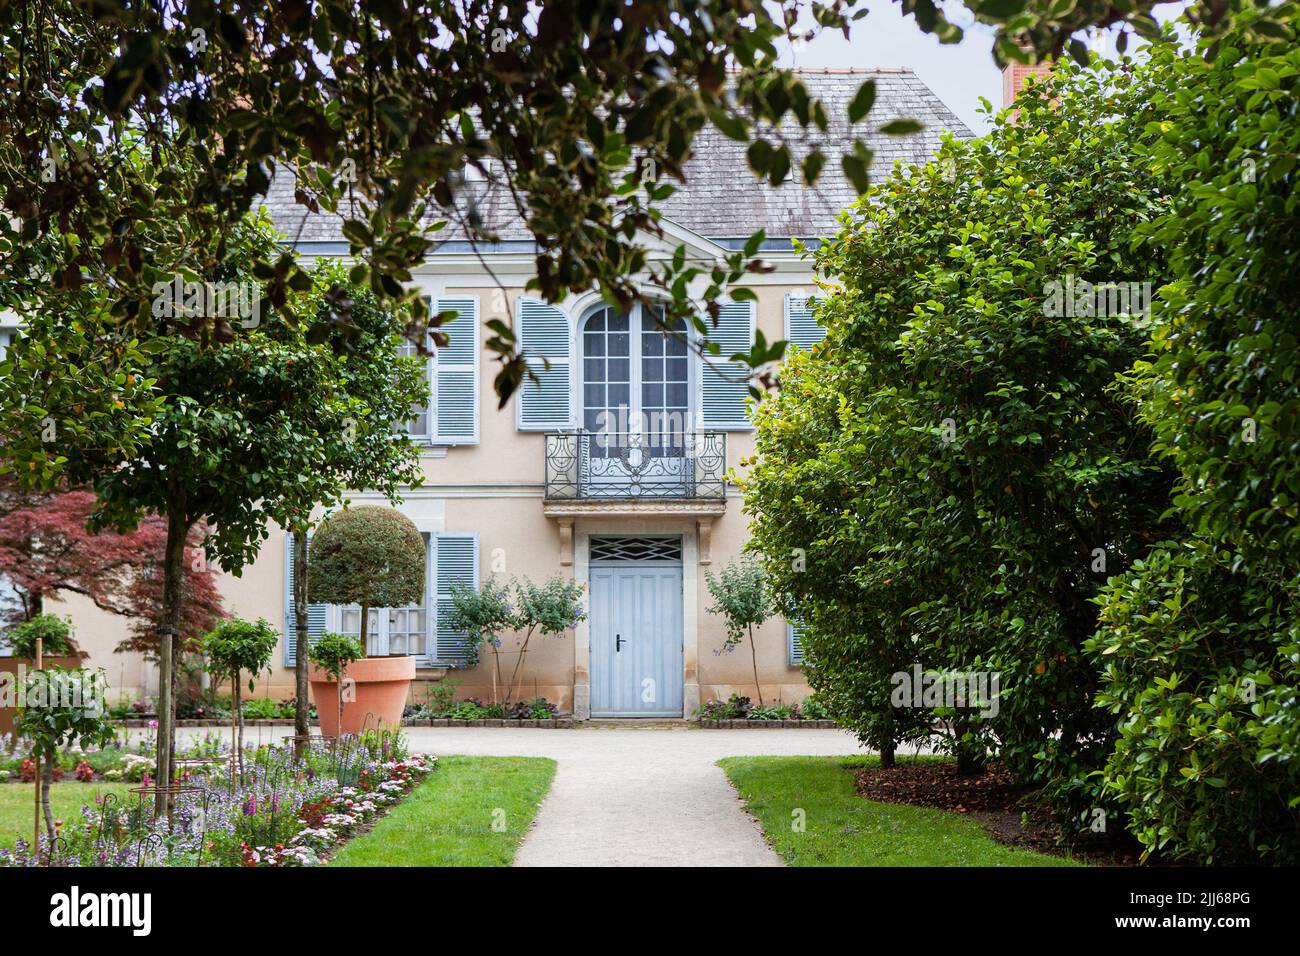 Public French house in a luxuriant park Stock Photo